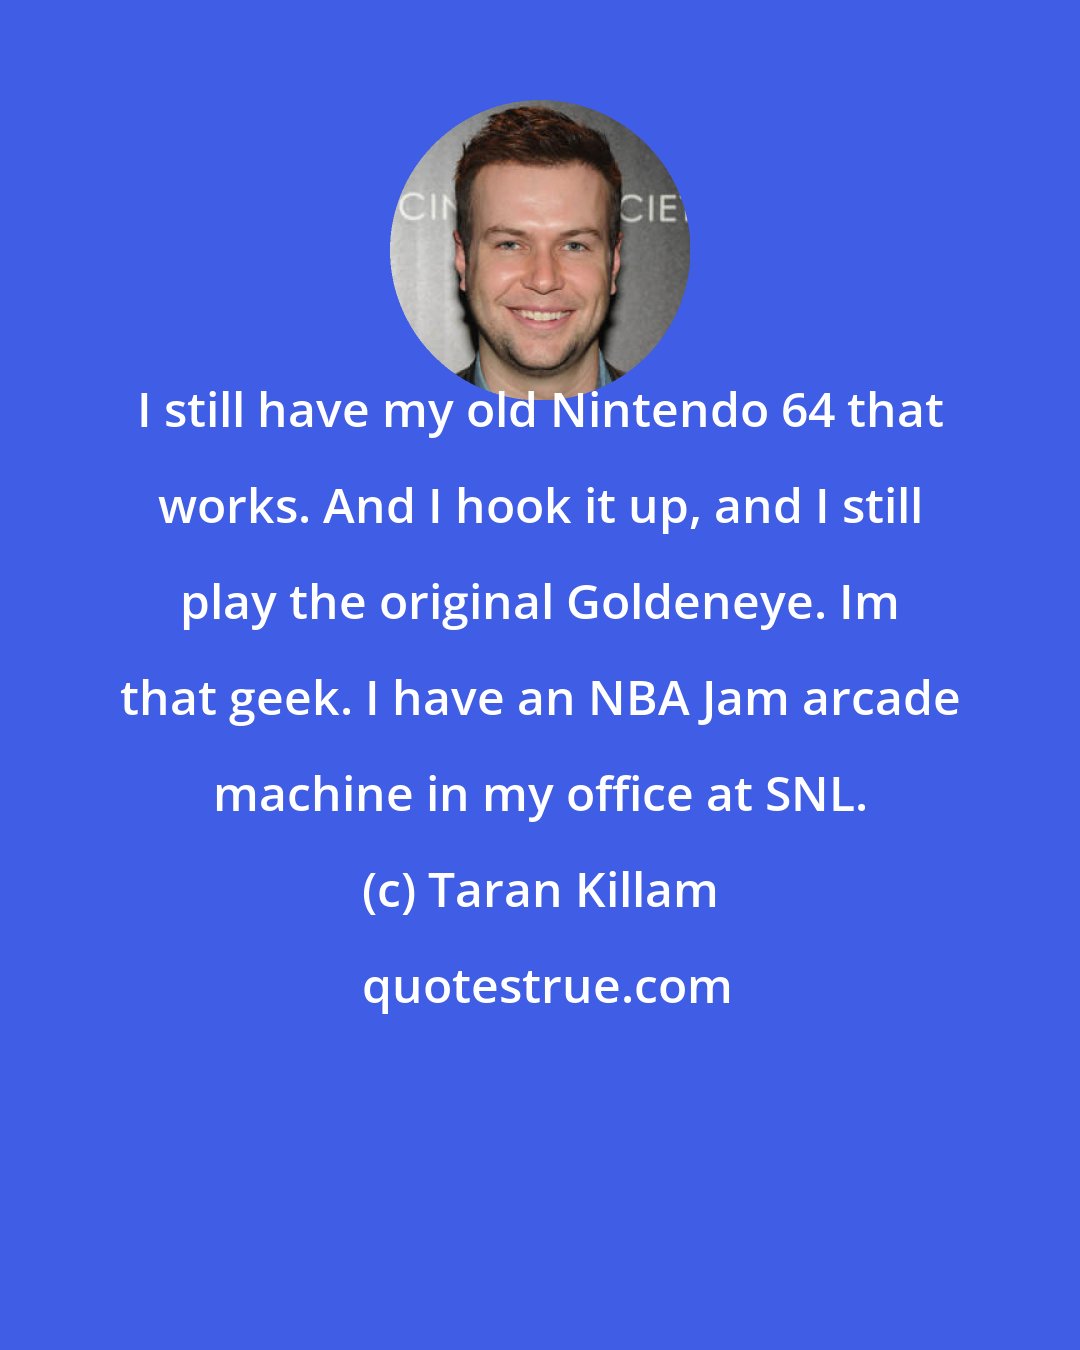 Taran Killam: I still have my old Nintendo 64 that works. And I hook it up, and I still play the original Goldeneye. Im that geek. I have an NBA Jam arcade machine in my office at SNL.